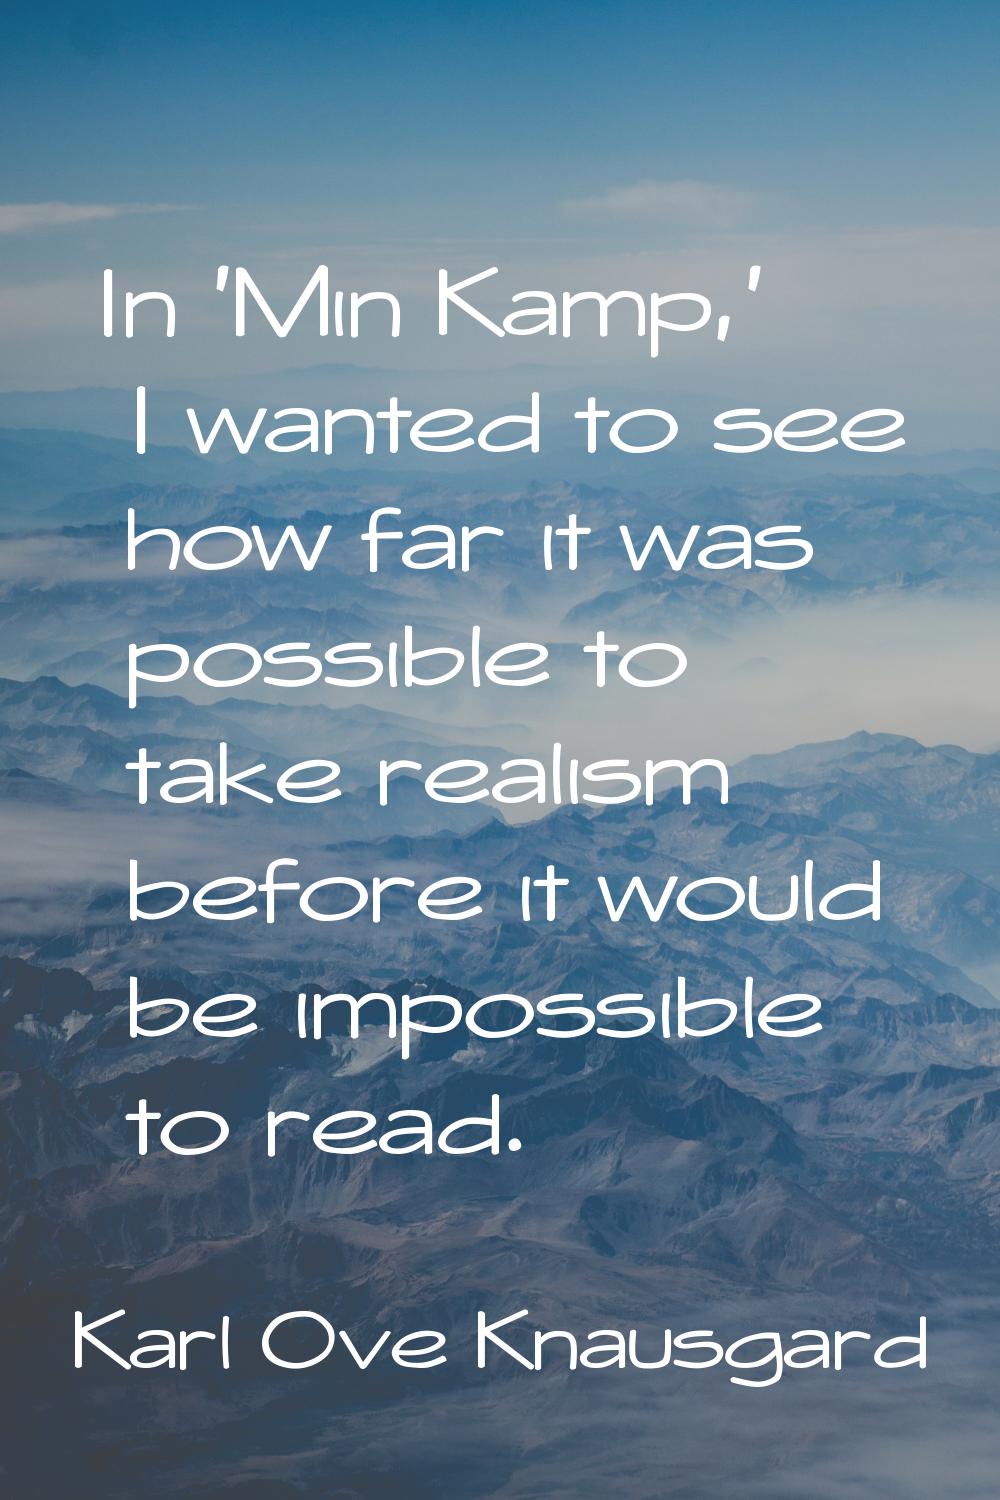 In 'Min Kamp,' I wanted to see how far it was possible to take realism before it would be impossibl